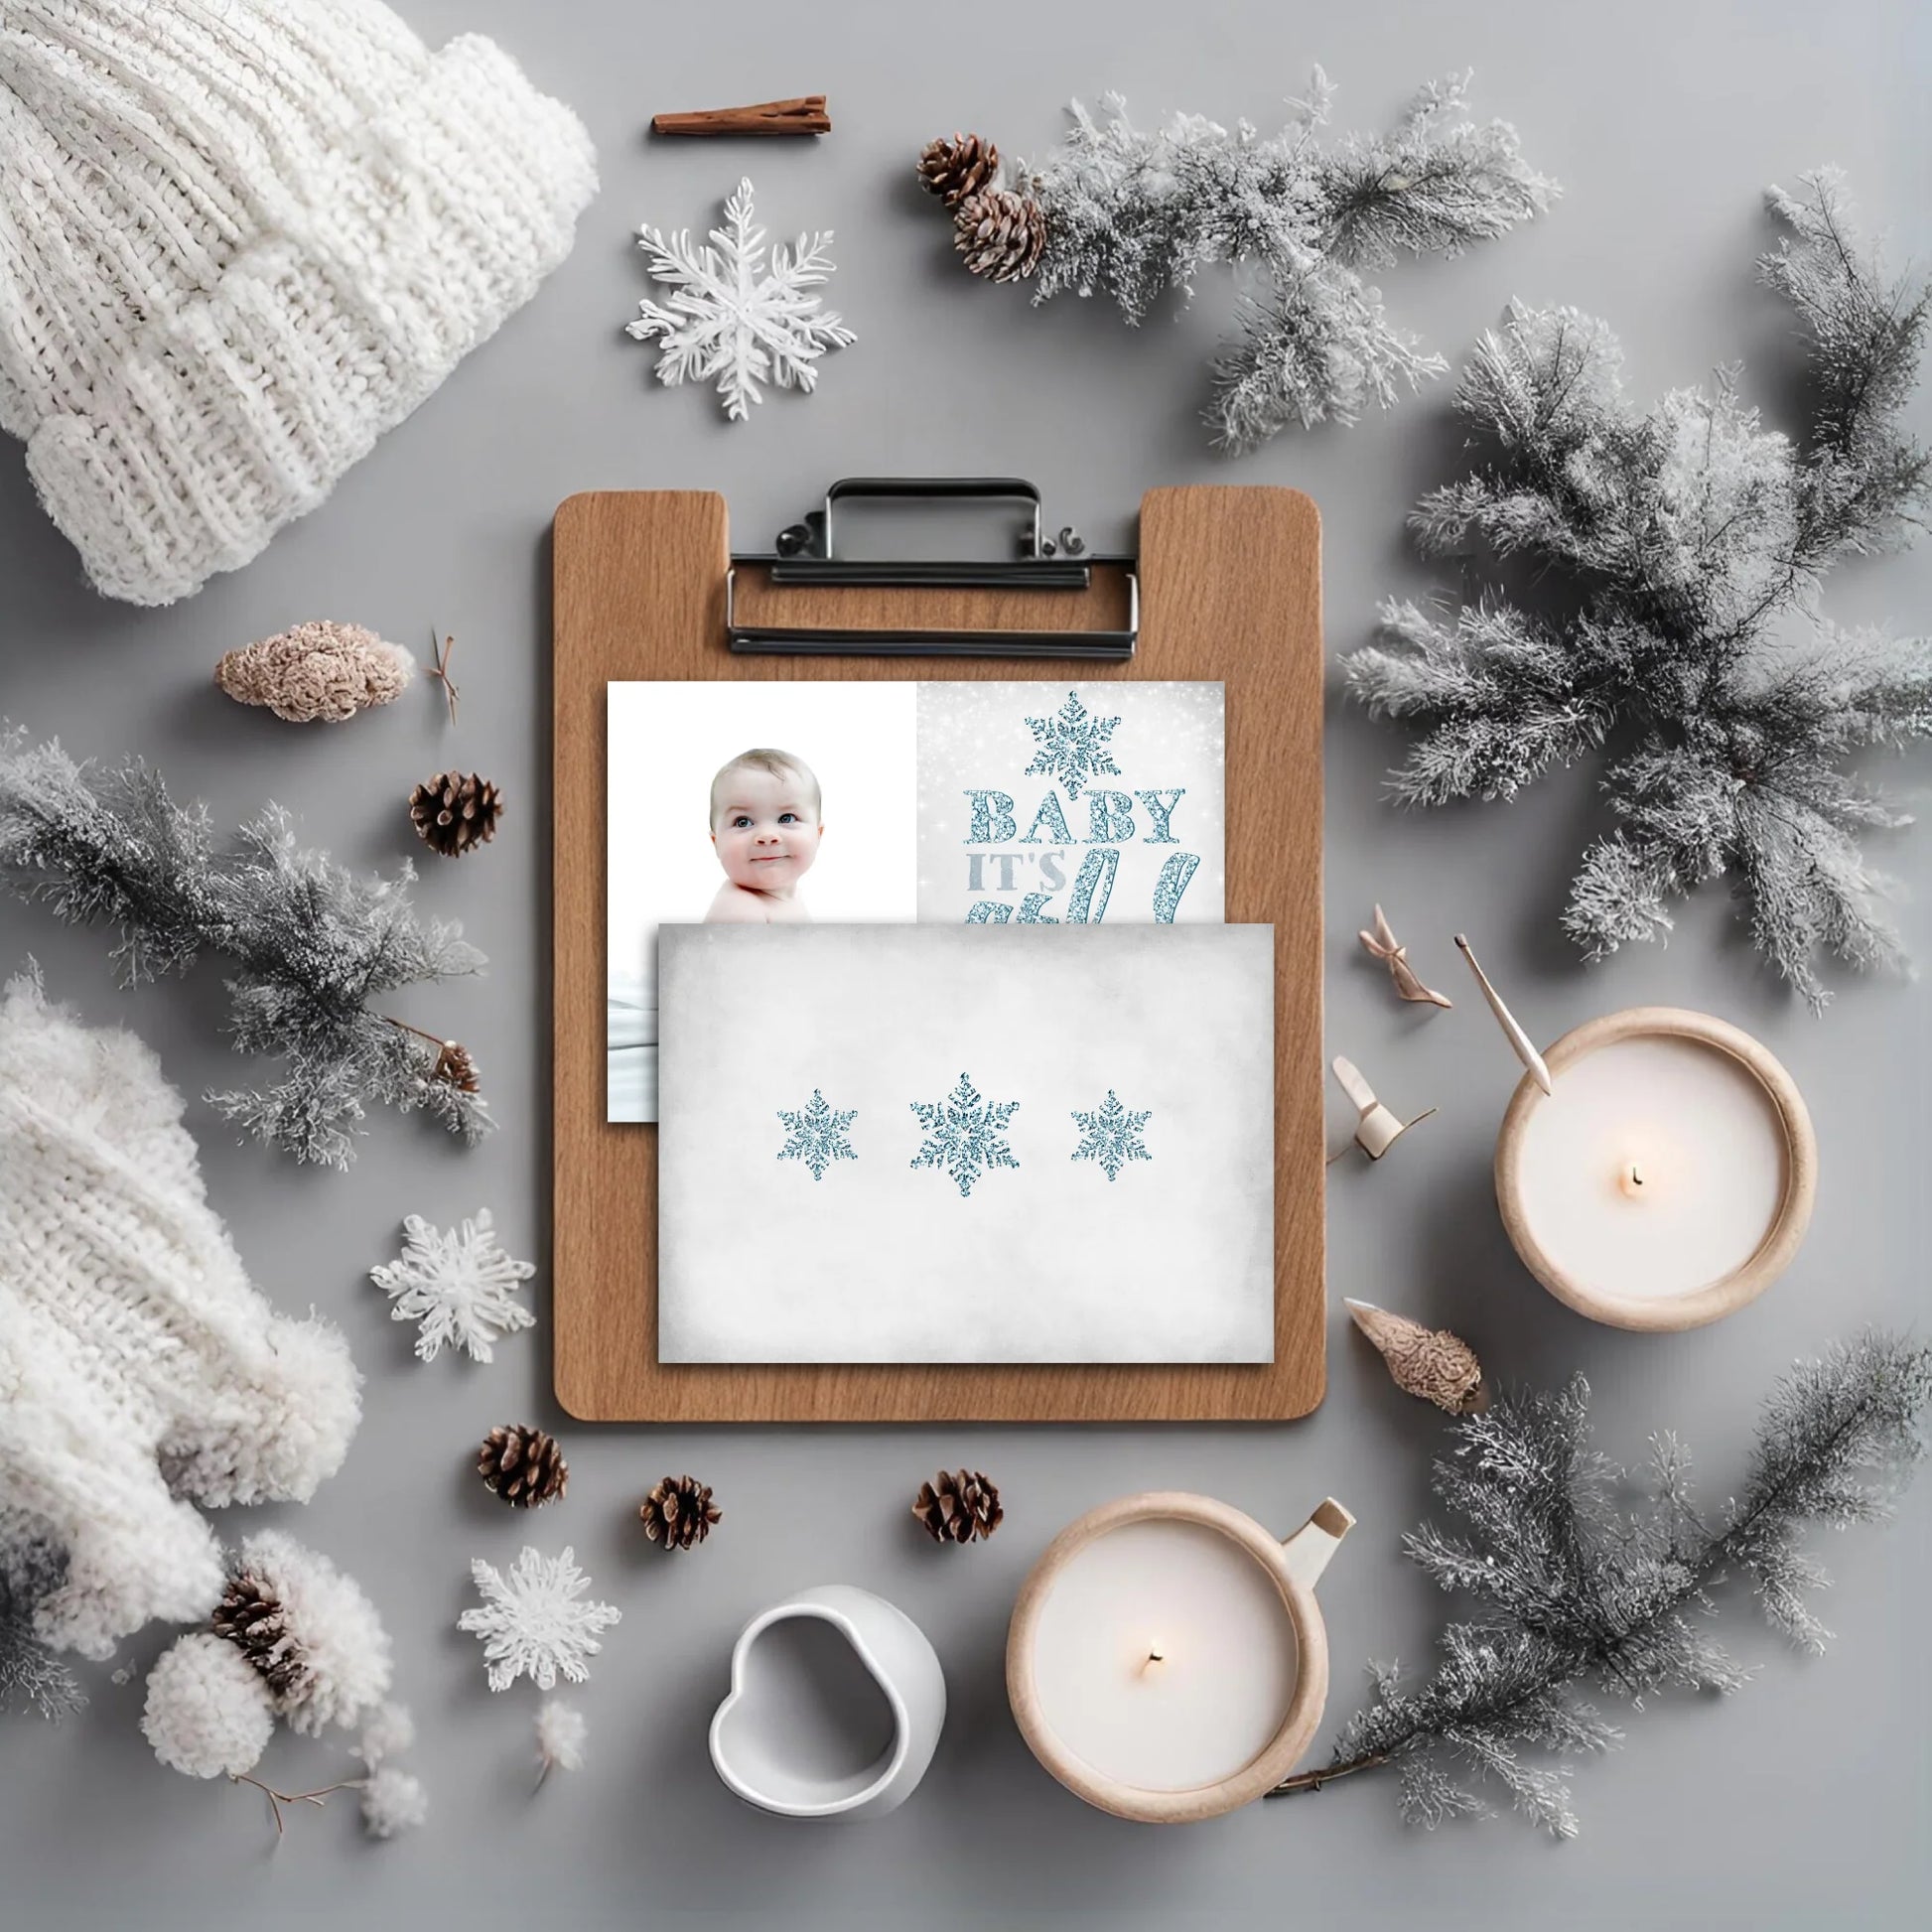 DIY Baby Its Cold Outside Editable Holiday Card Template Personalized Photo Greeting